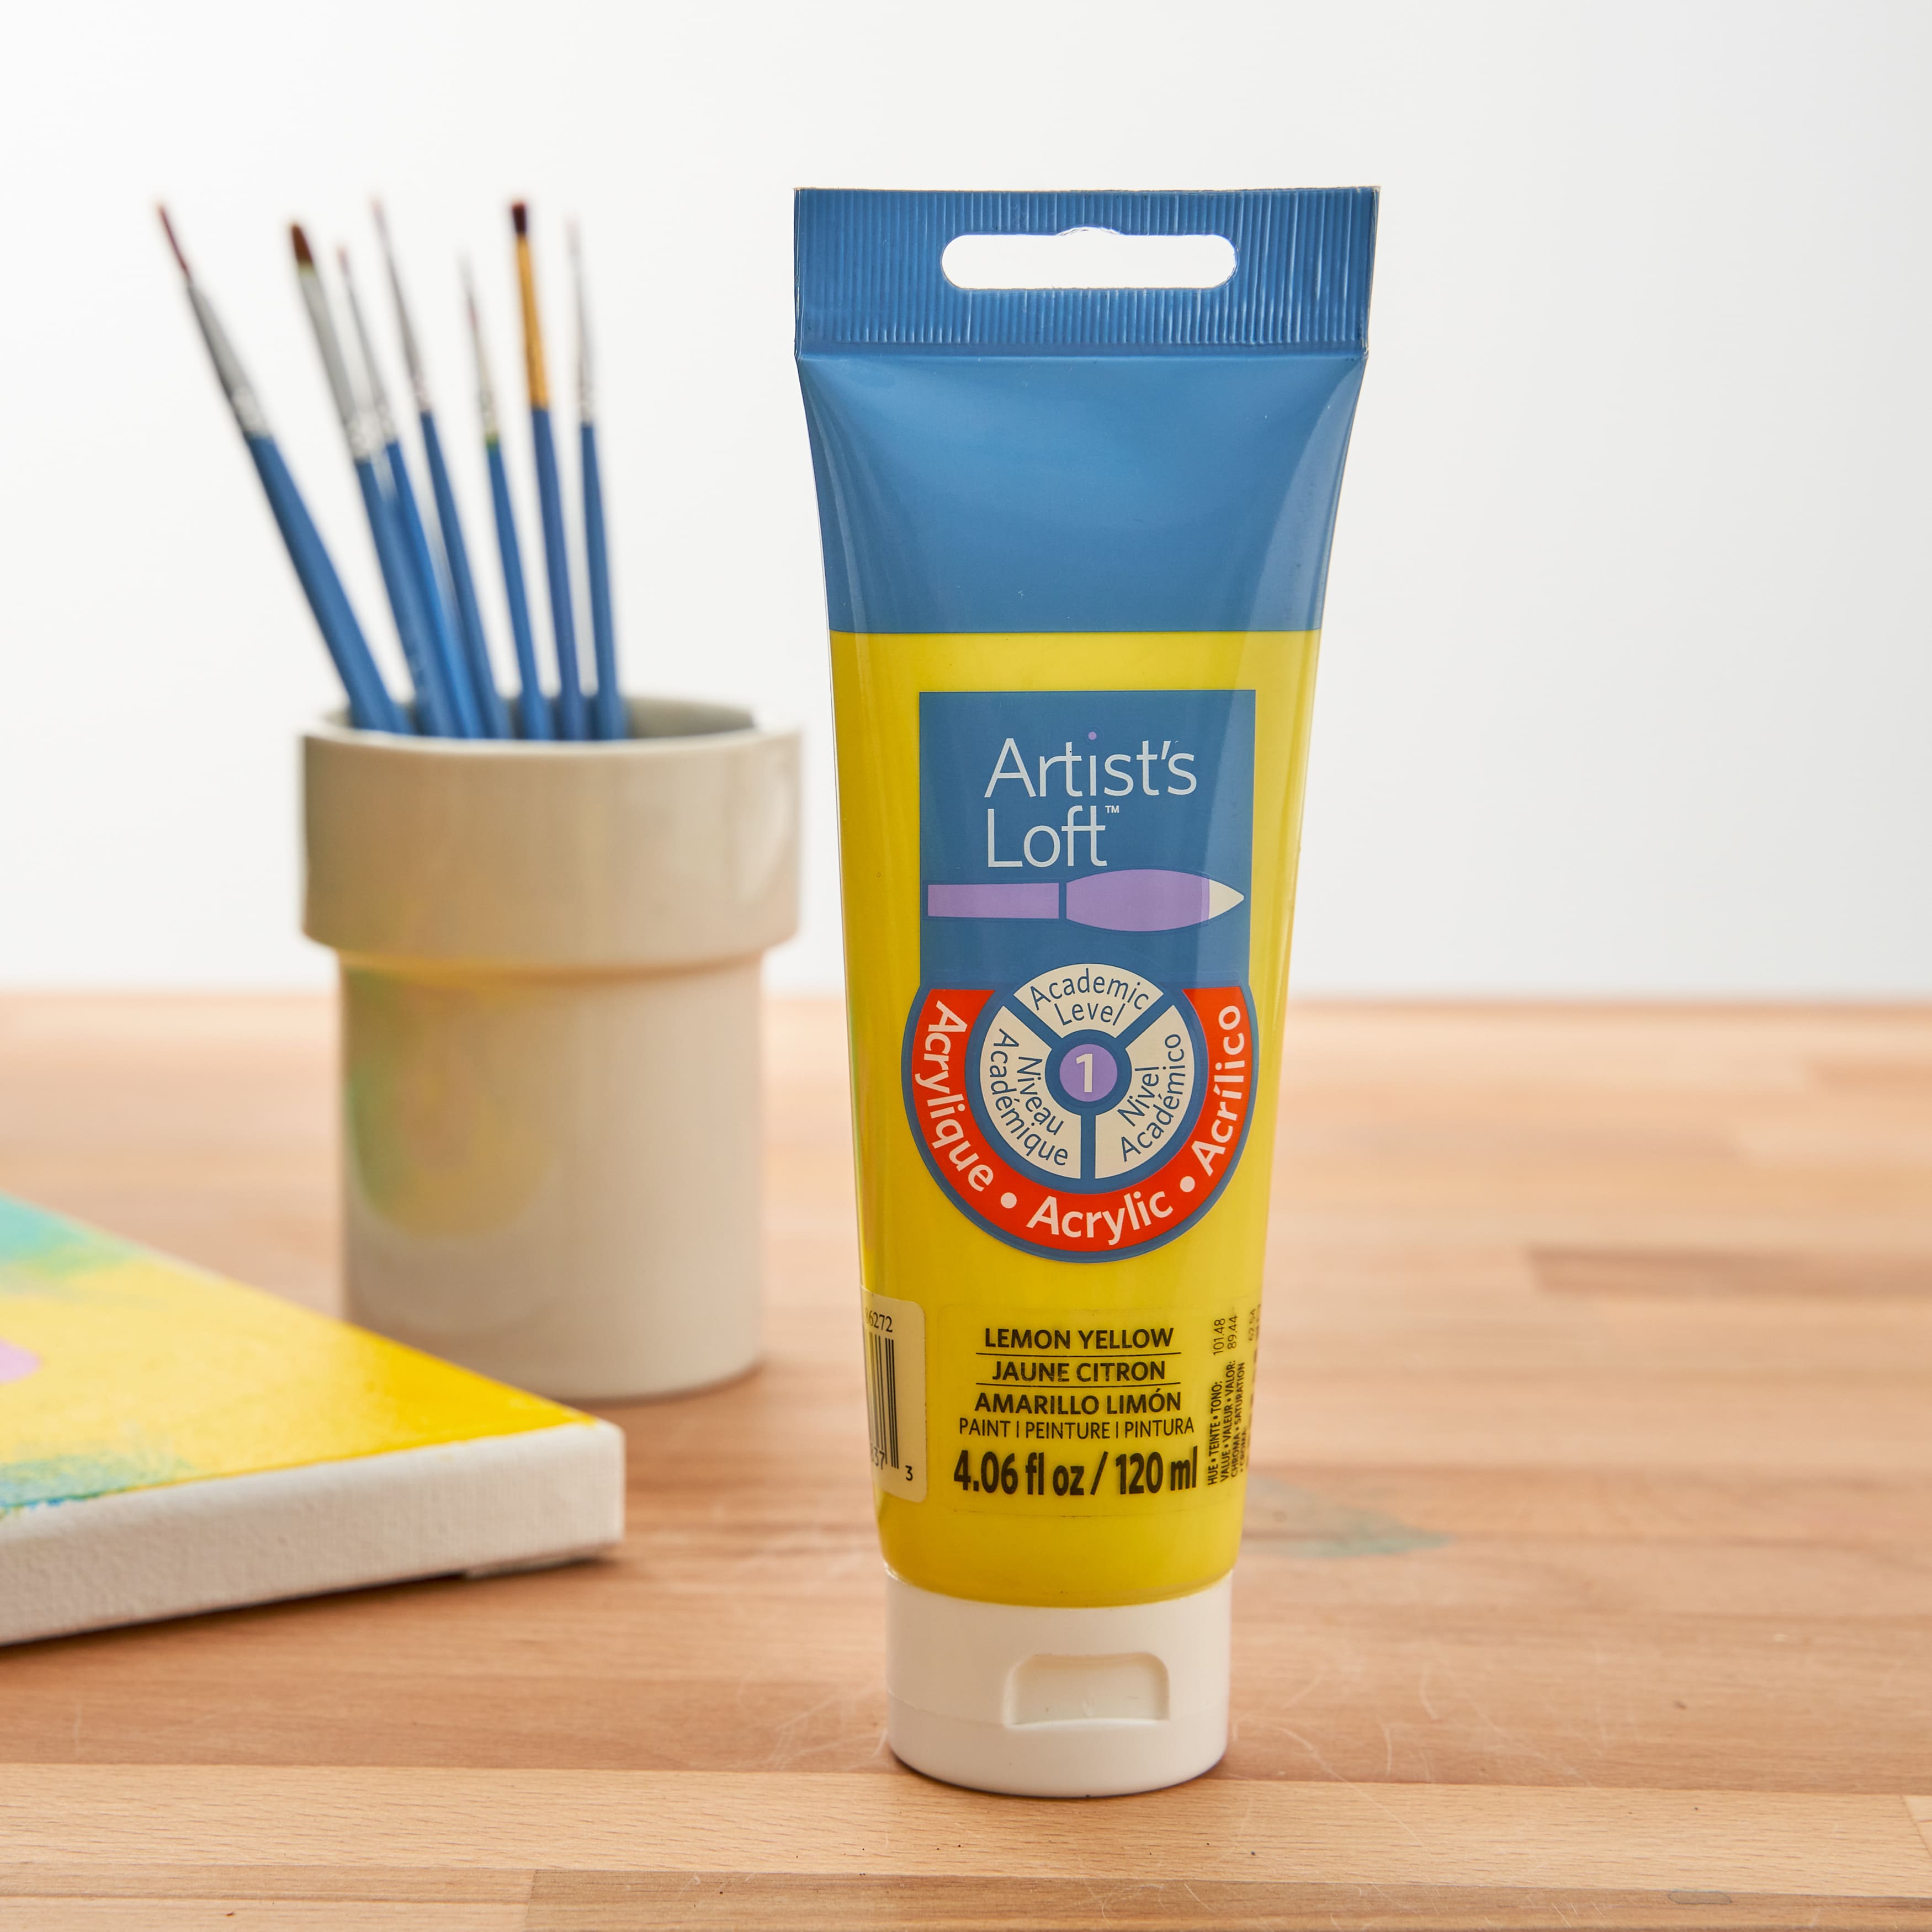 Artist Loft 3 Acrylic - Are They Really Professional Paints? 